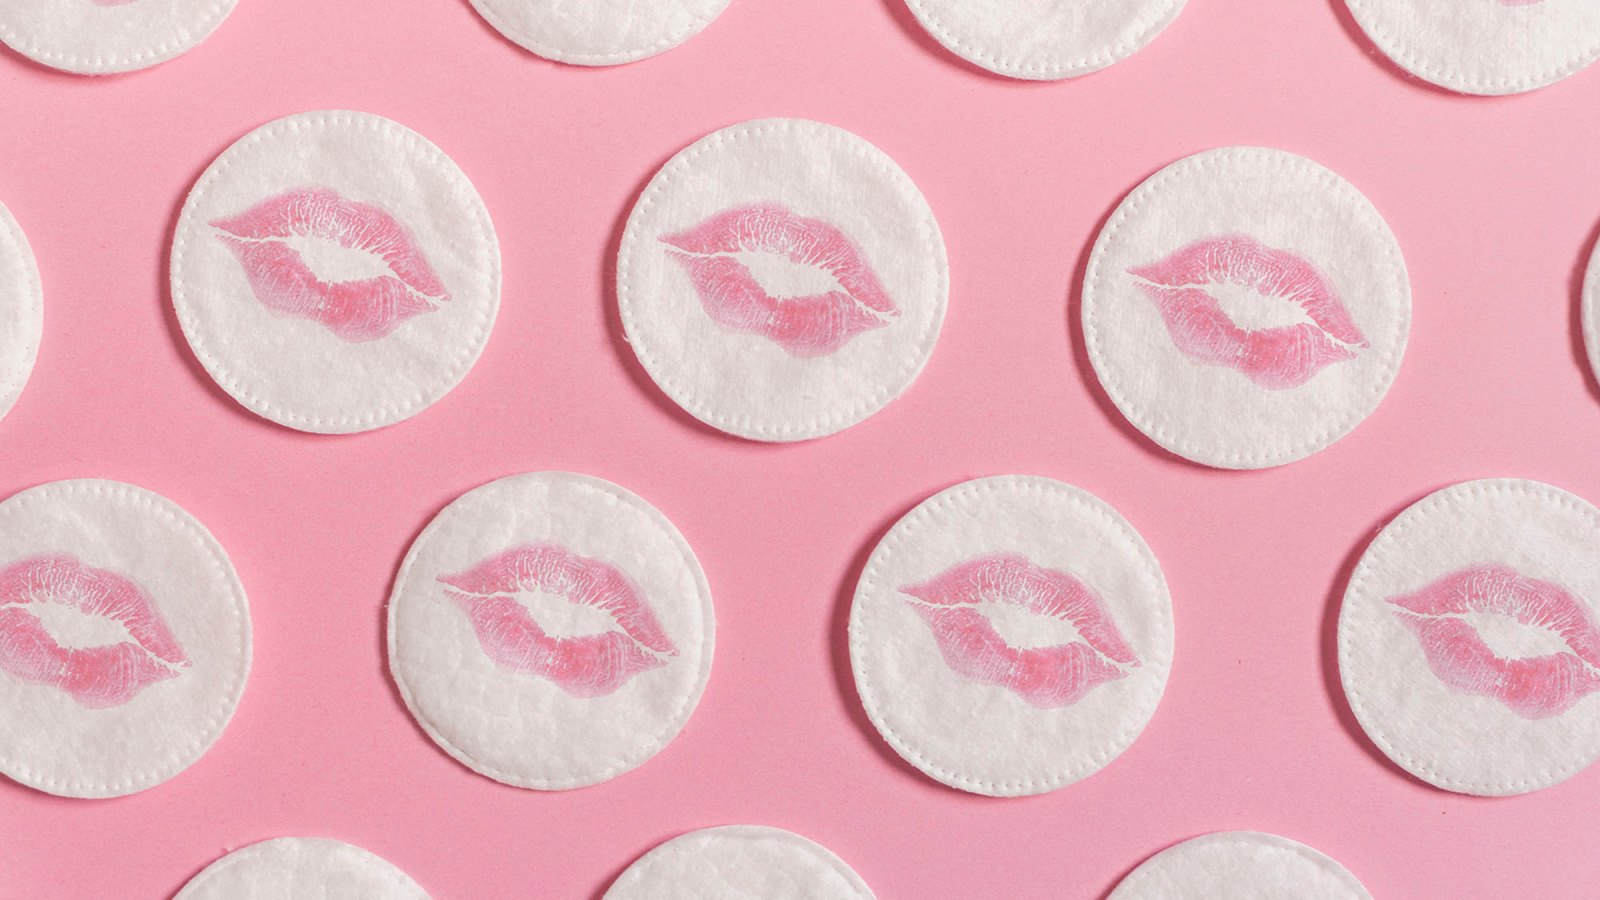 The cottons have marked lips. Concept of femininity, beauty, body care...